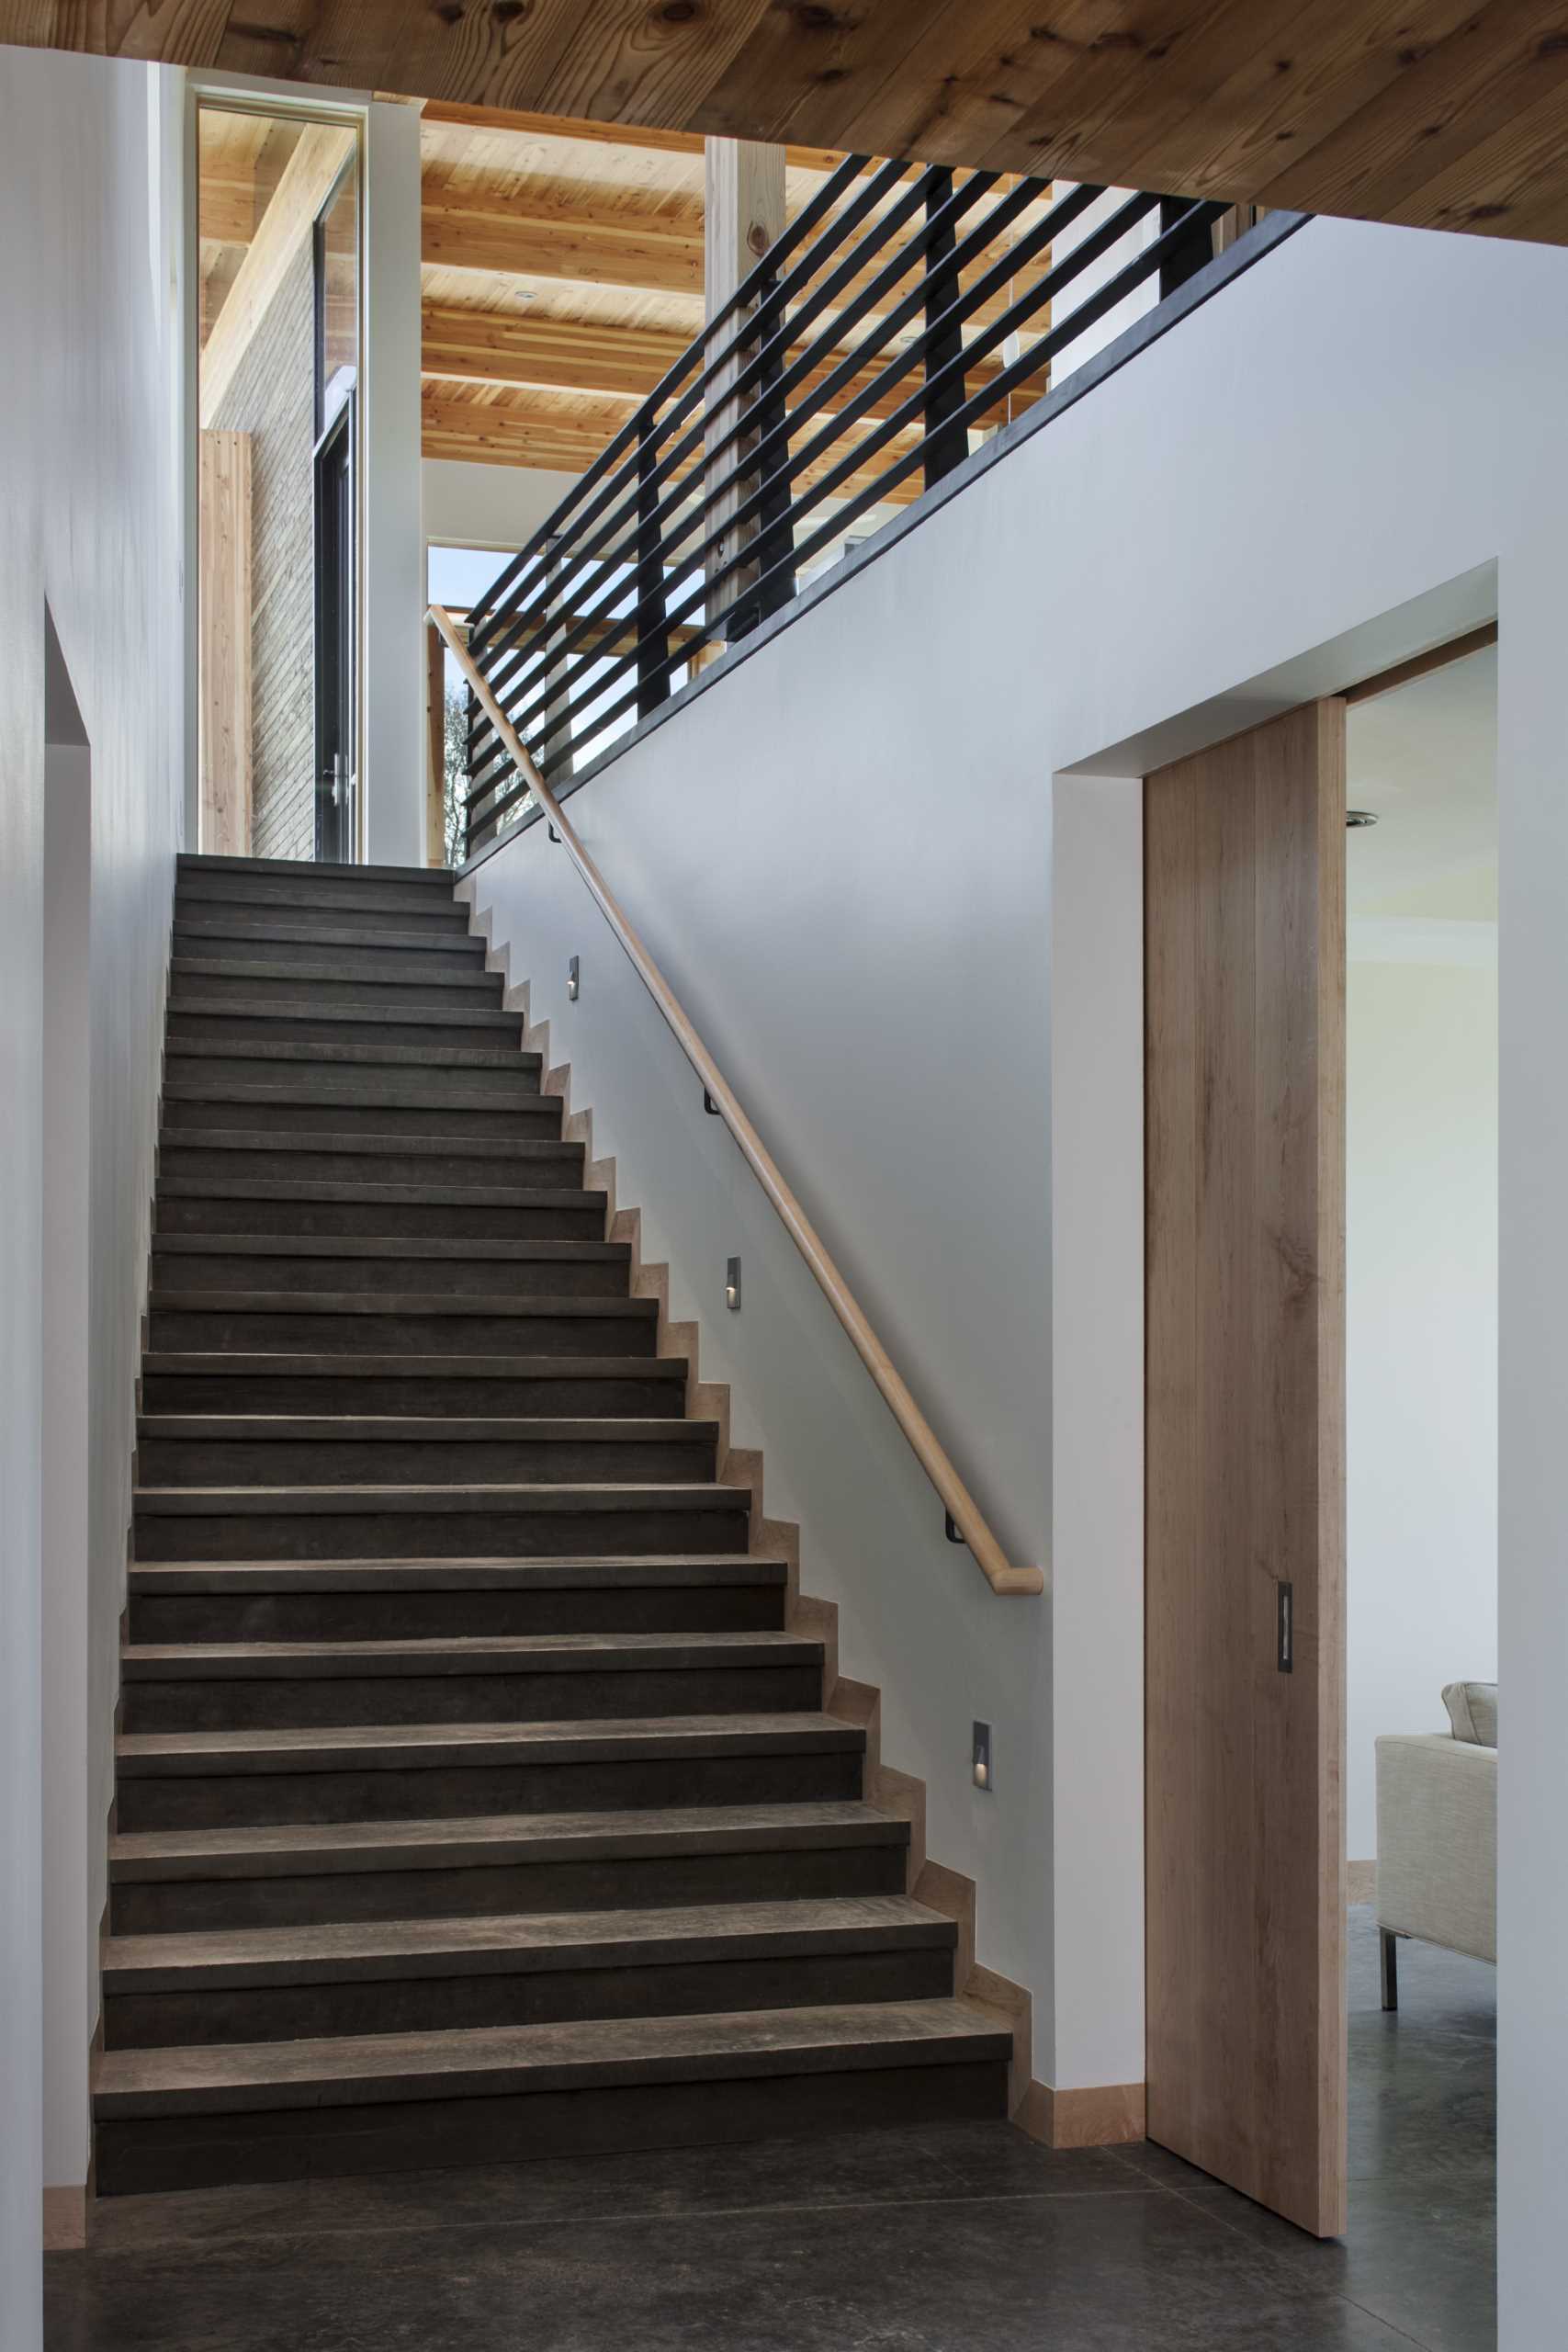 Contemporary stairs connect the levels of this home.